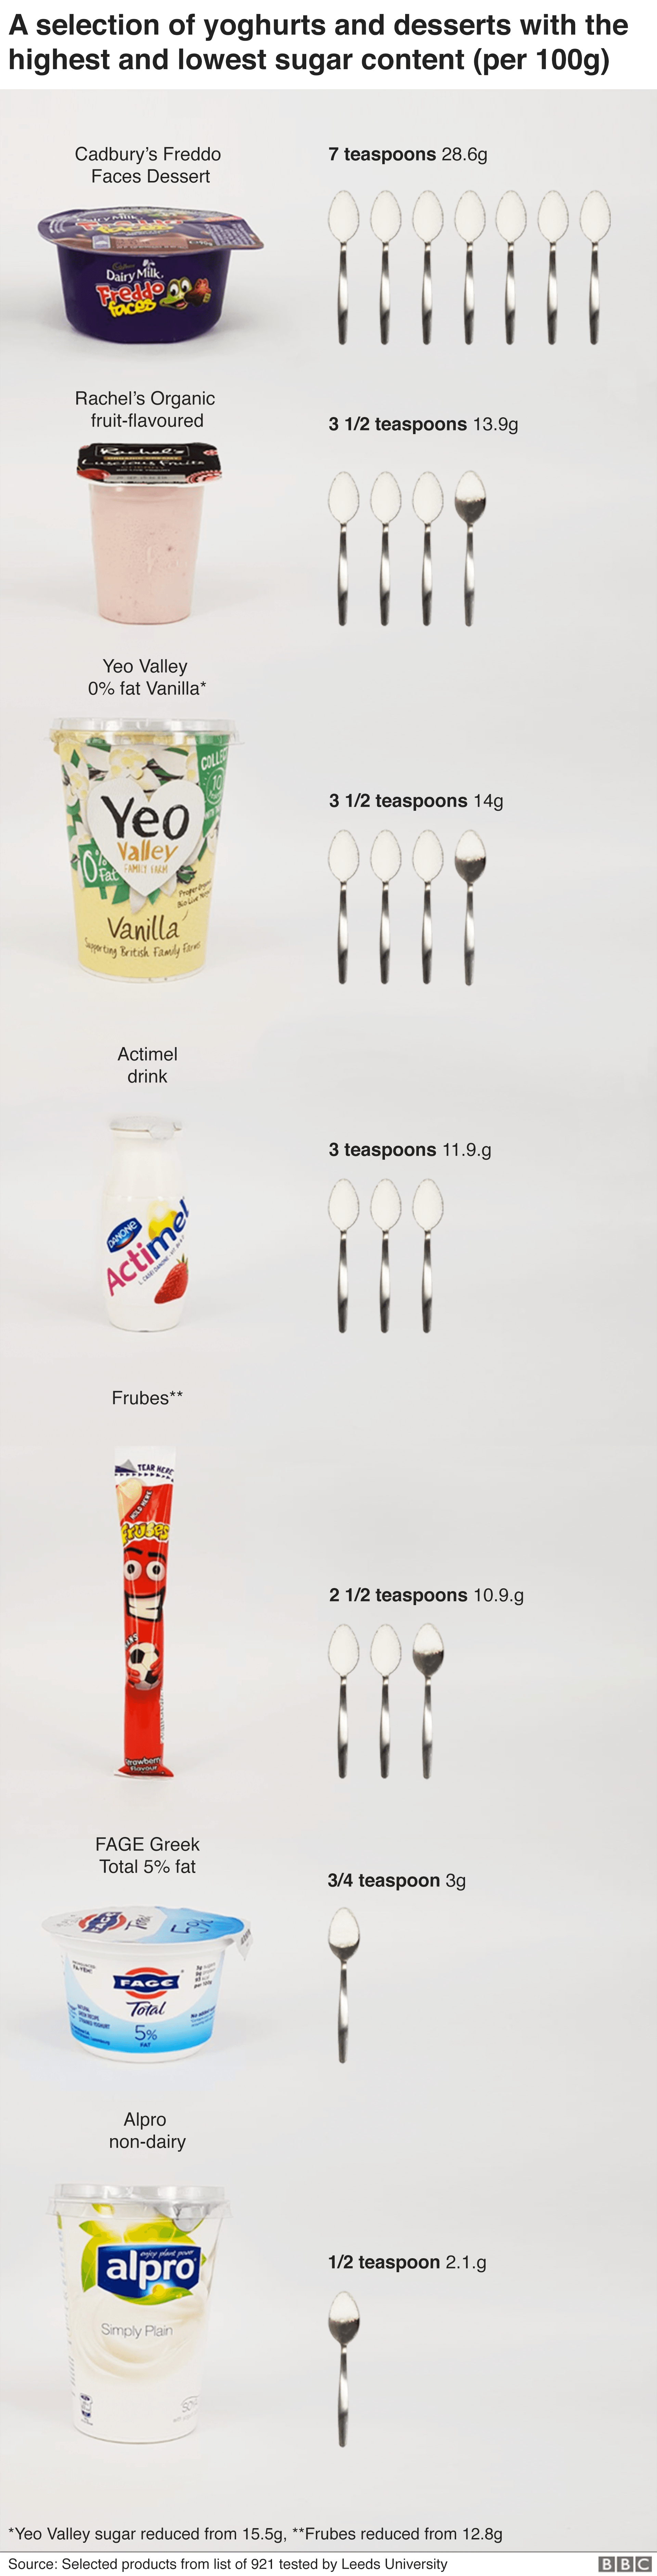 Graphic showing different yoghurts and dessers and their sugar content